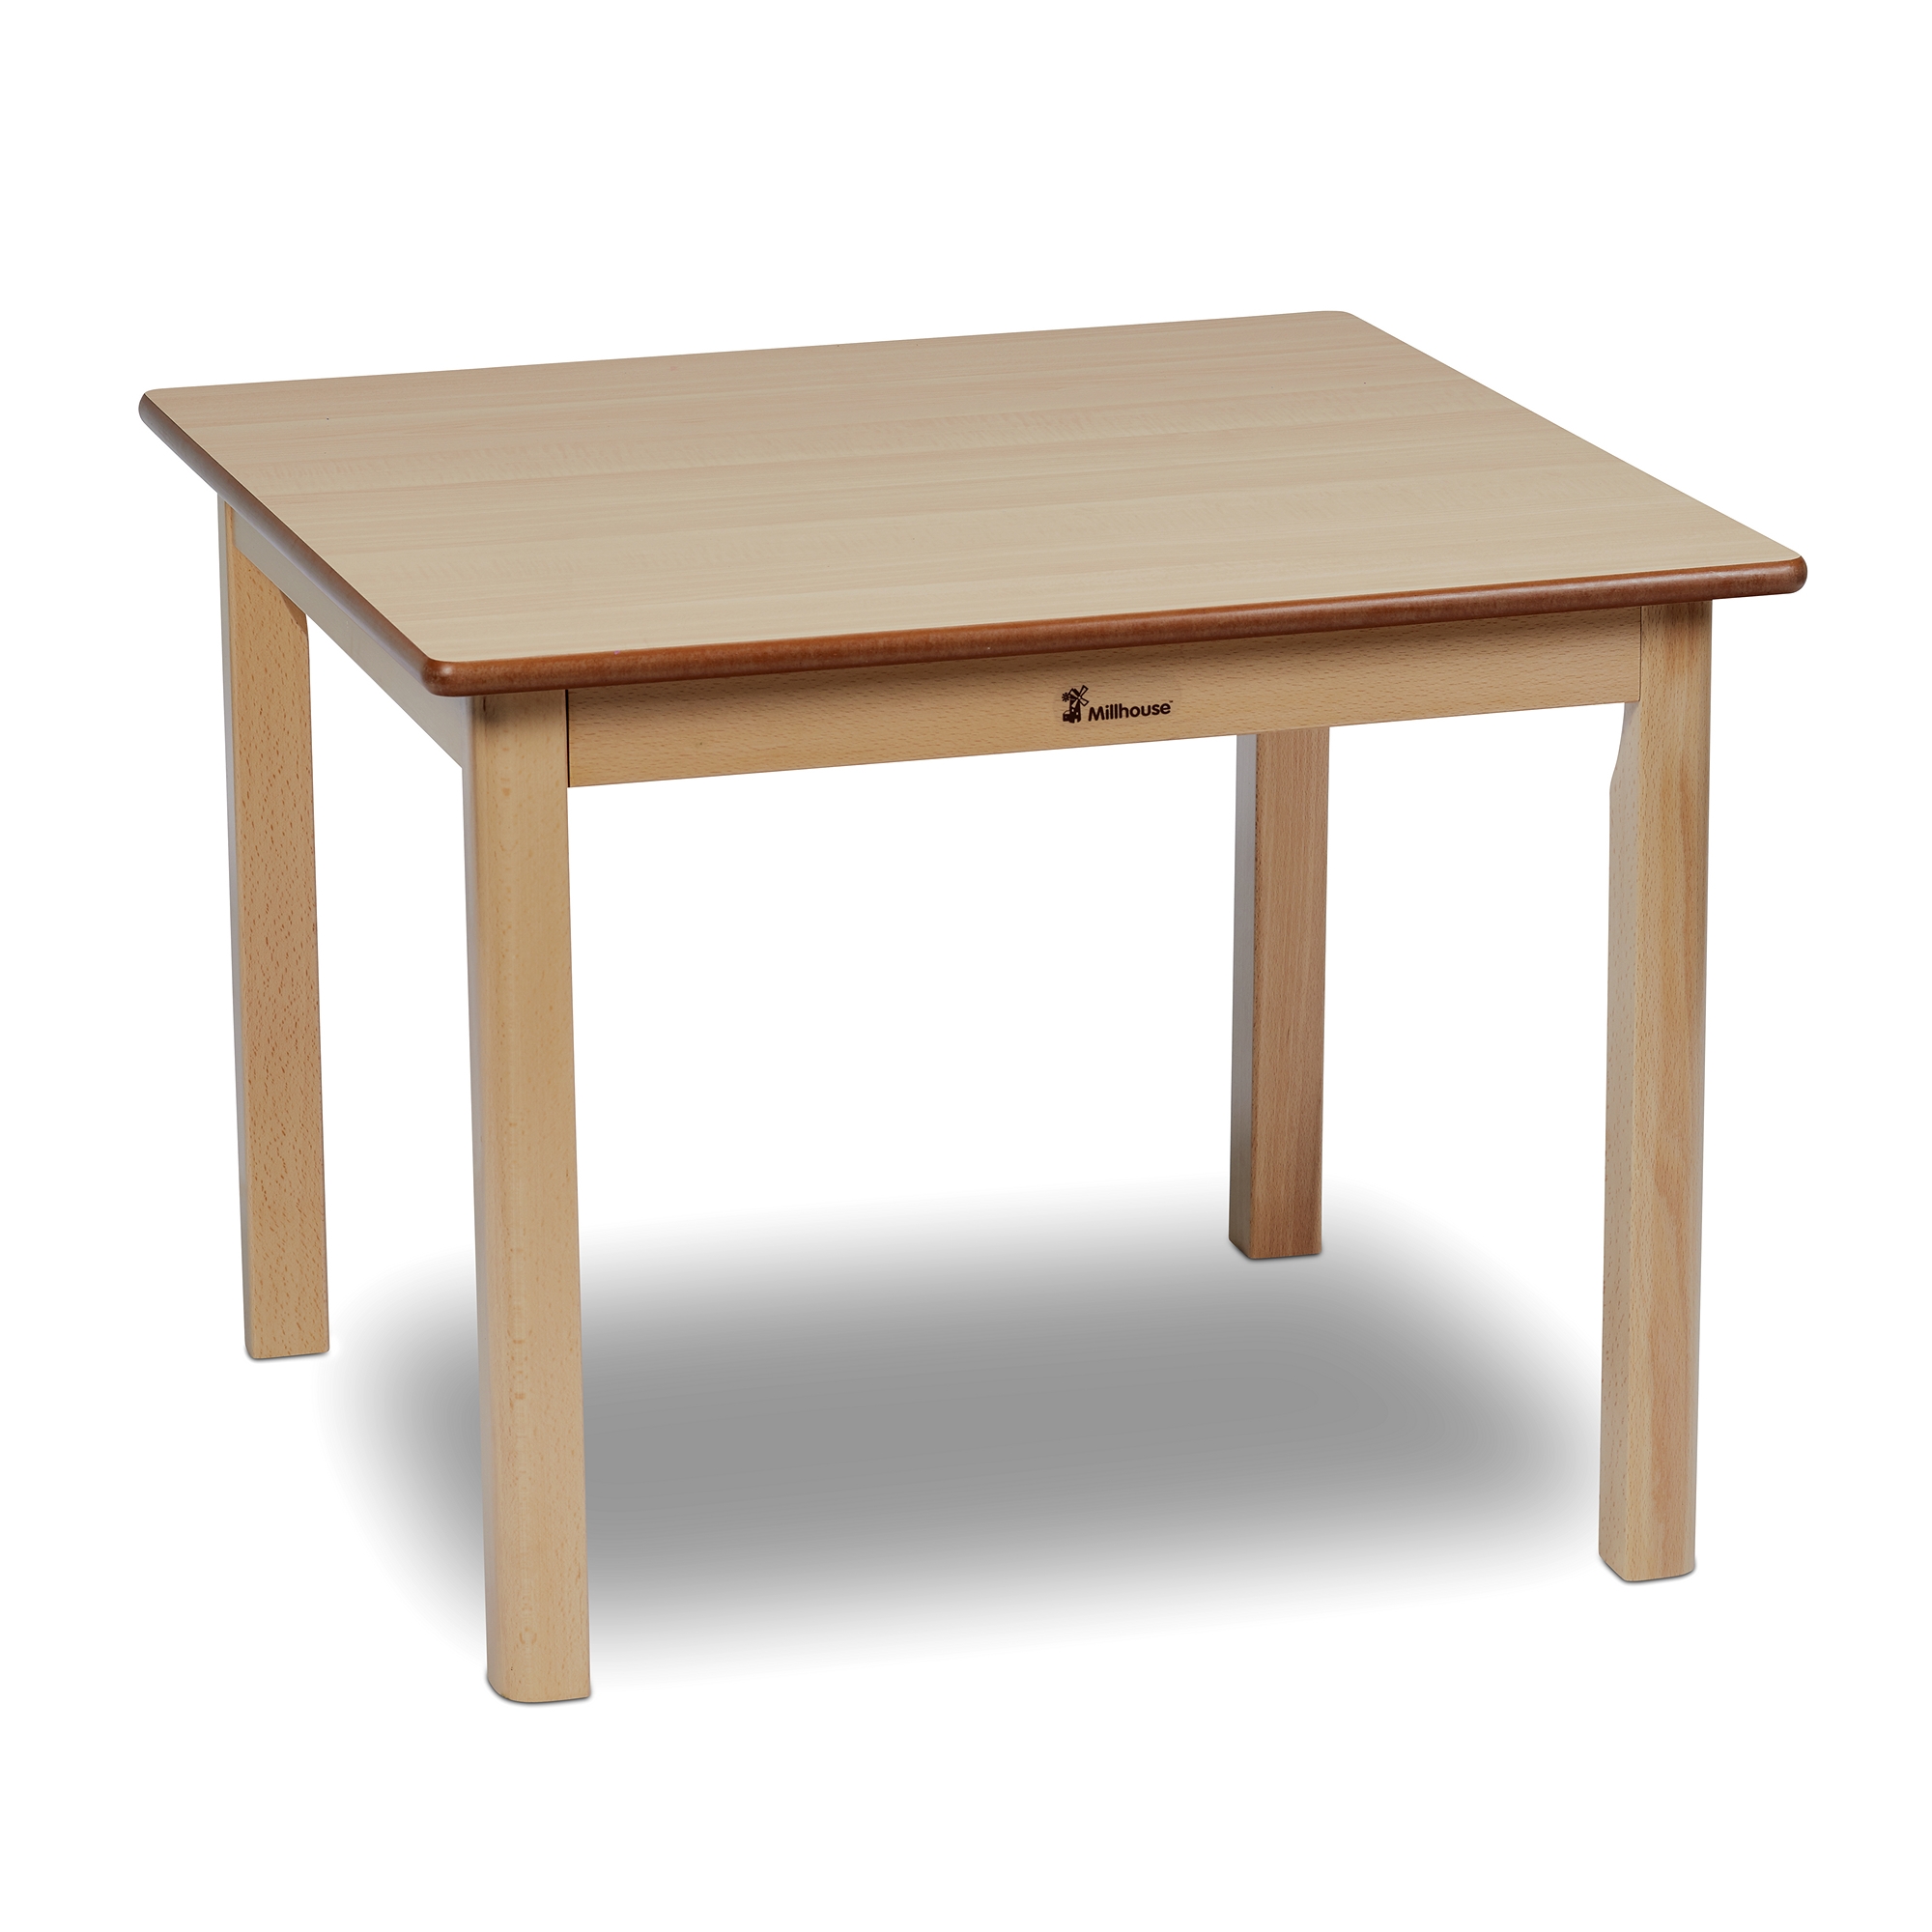 Playscapes Square Table - 460mm Height